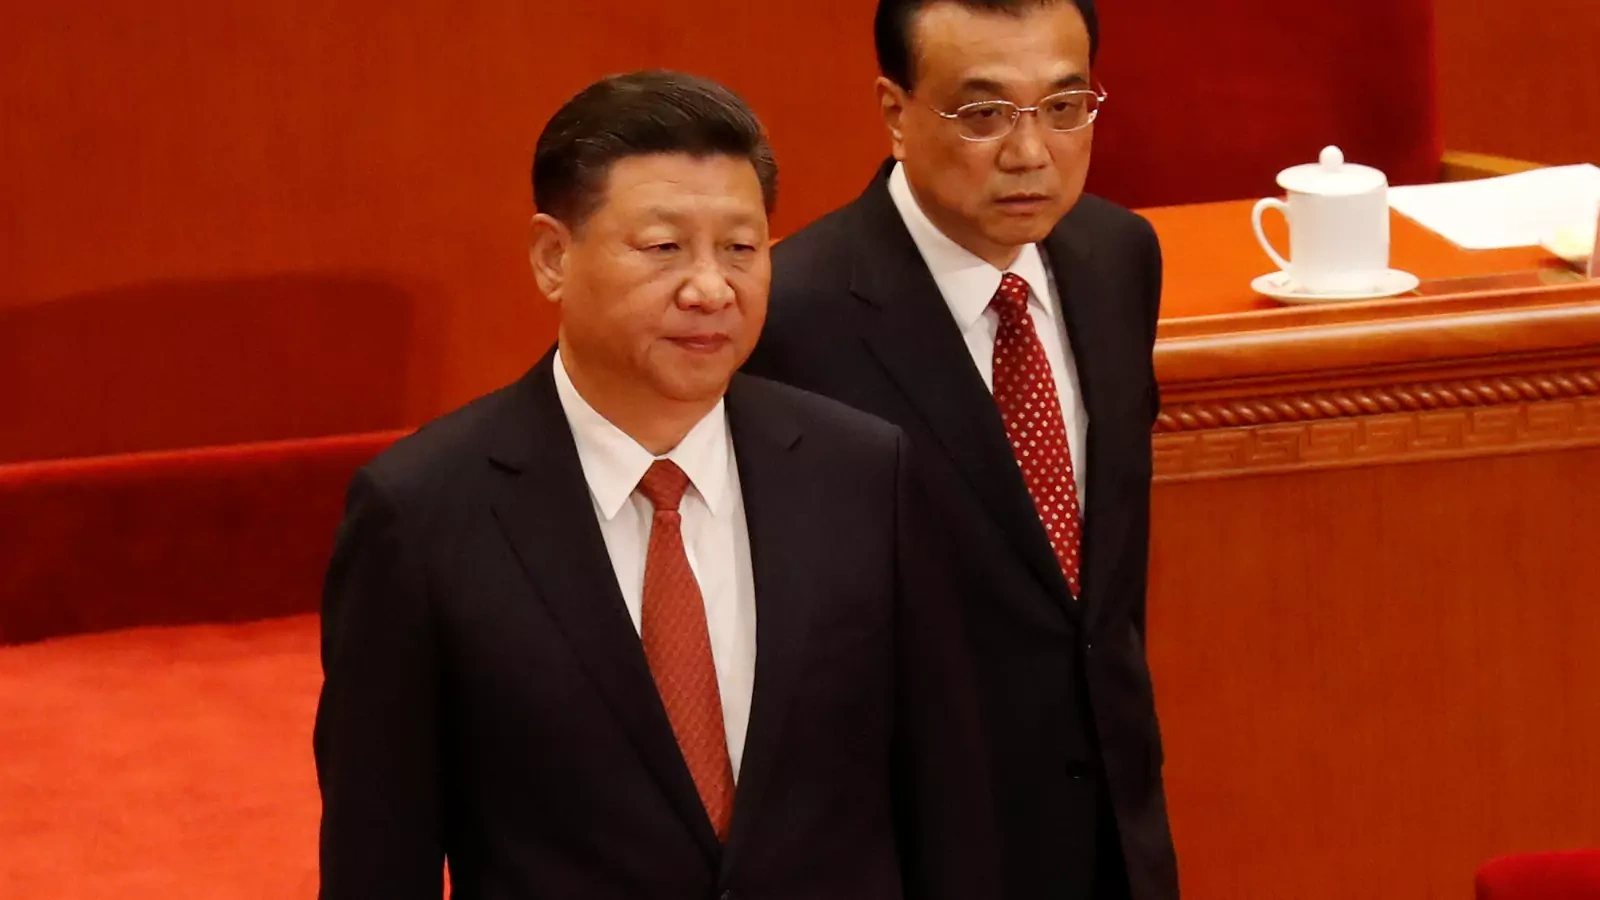 China's President Xi Jinping and Premier Li Keqiang arrive for the ceremony to mark the 90th anniversary of the founding of the China's People's Liberation Army at the Great Hall of the People in Beijing.